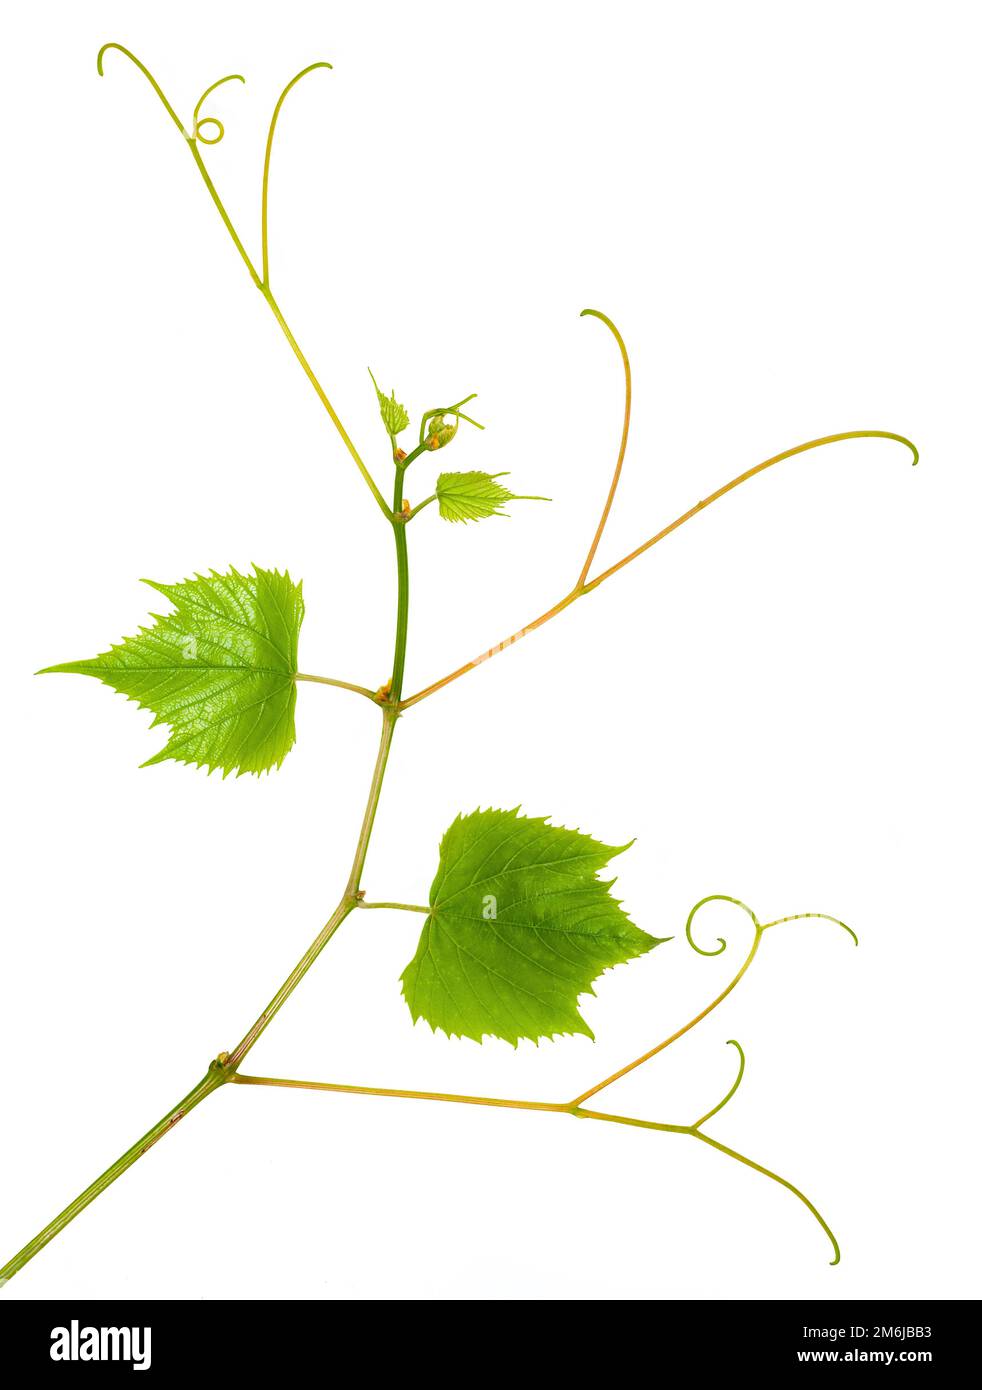 Branch of young grape vine tendrils on white background Stock Photo